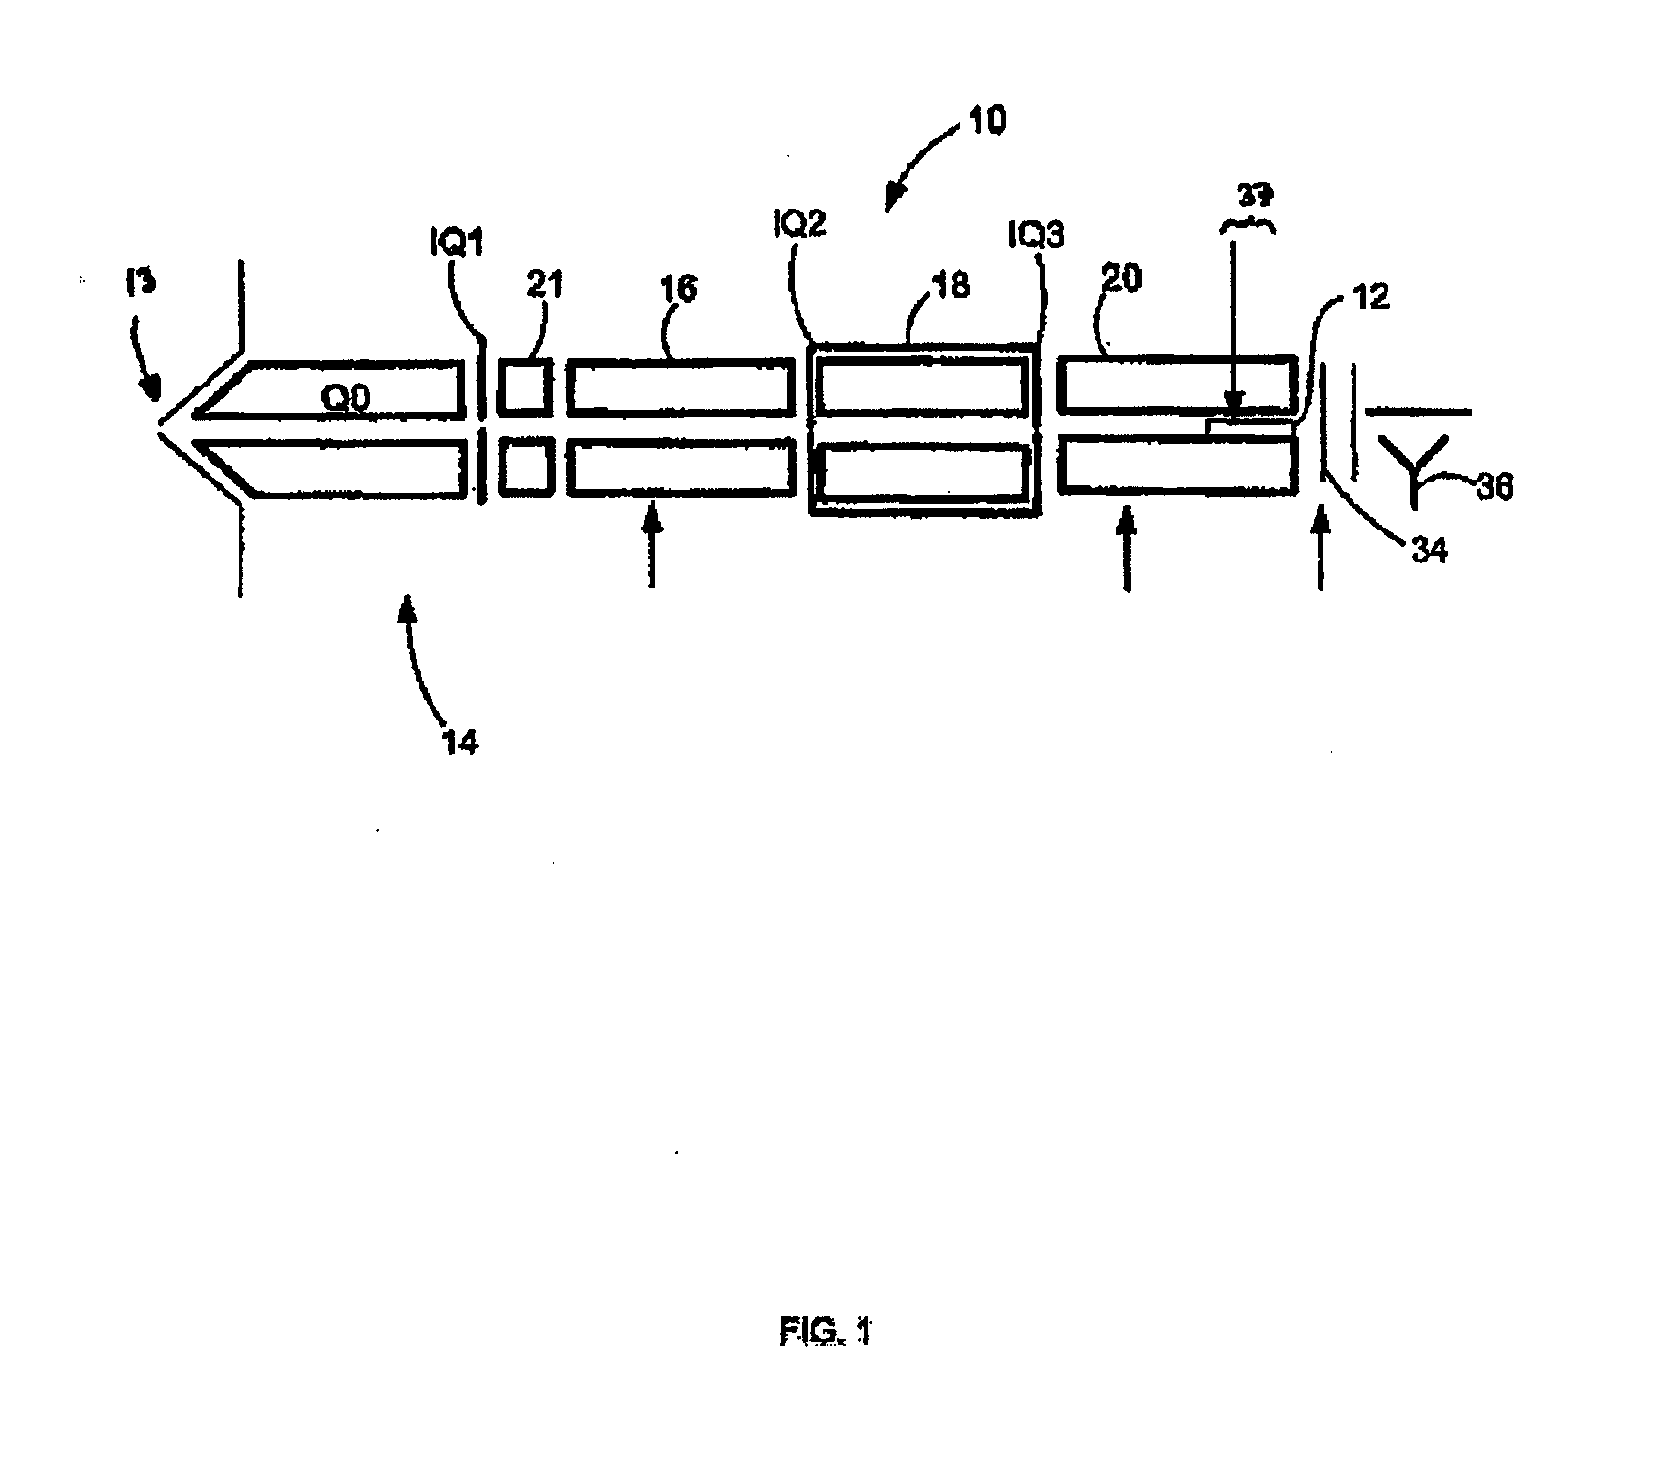 Methods and systems for providing a substantially quadrupole field with significant hexapole and octapole components